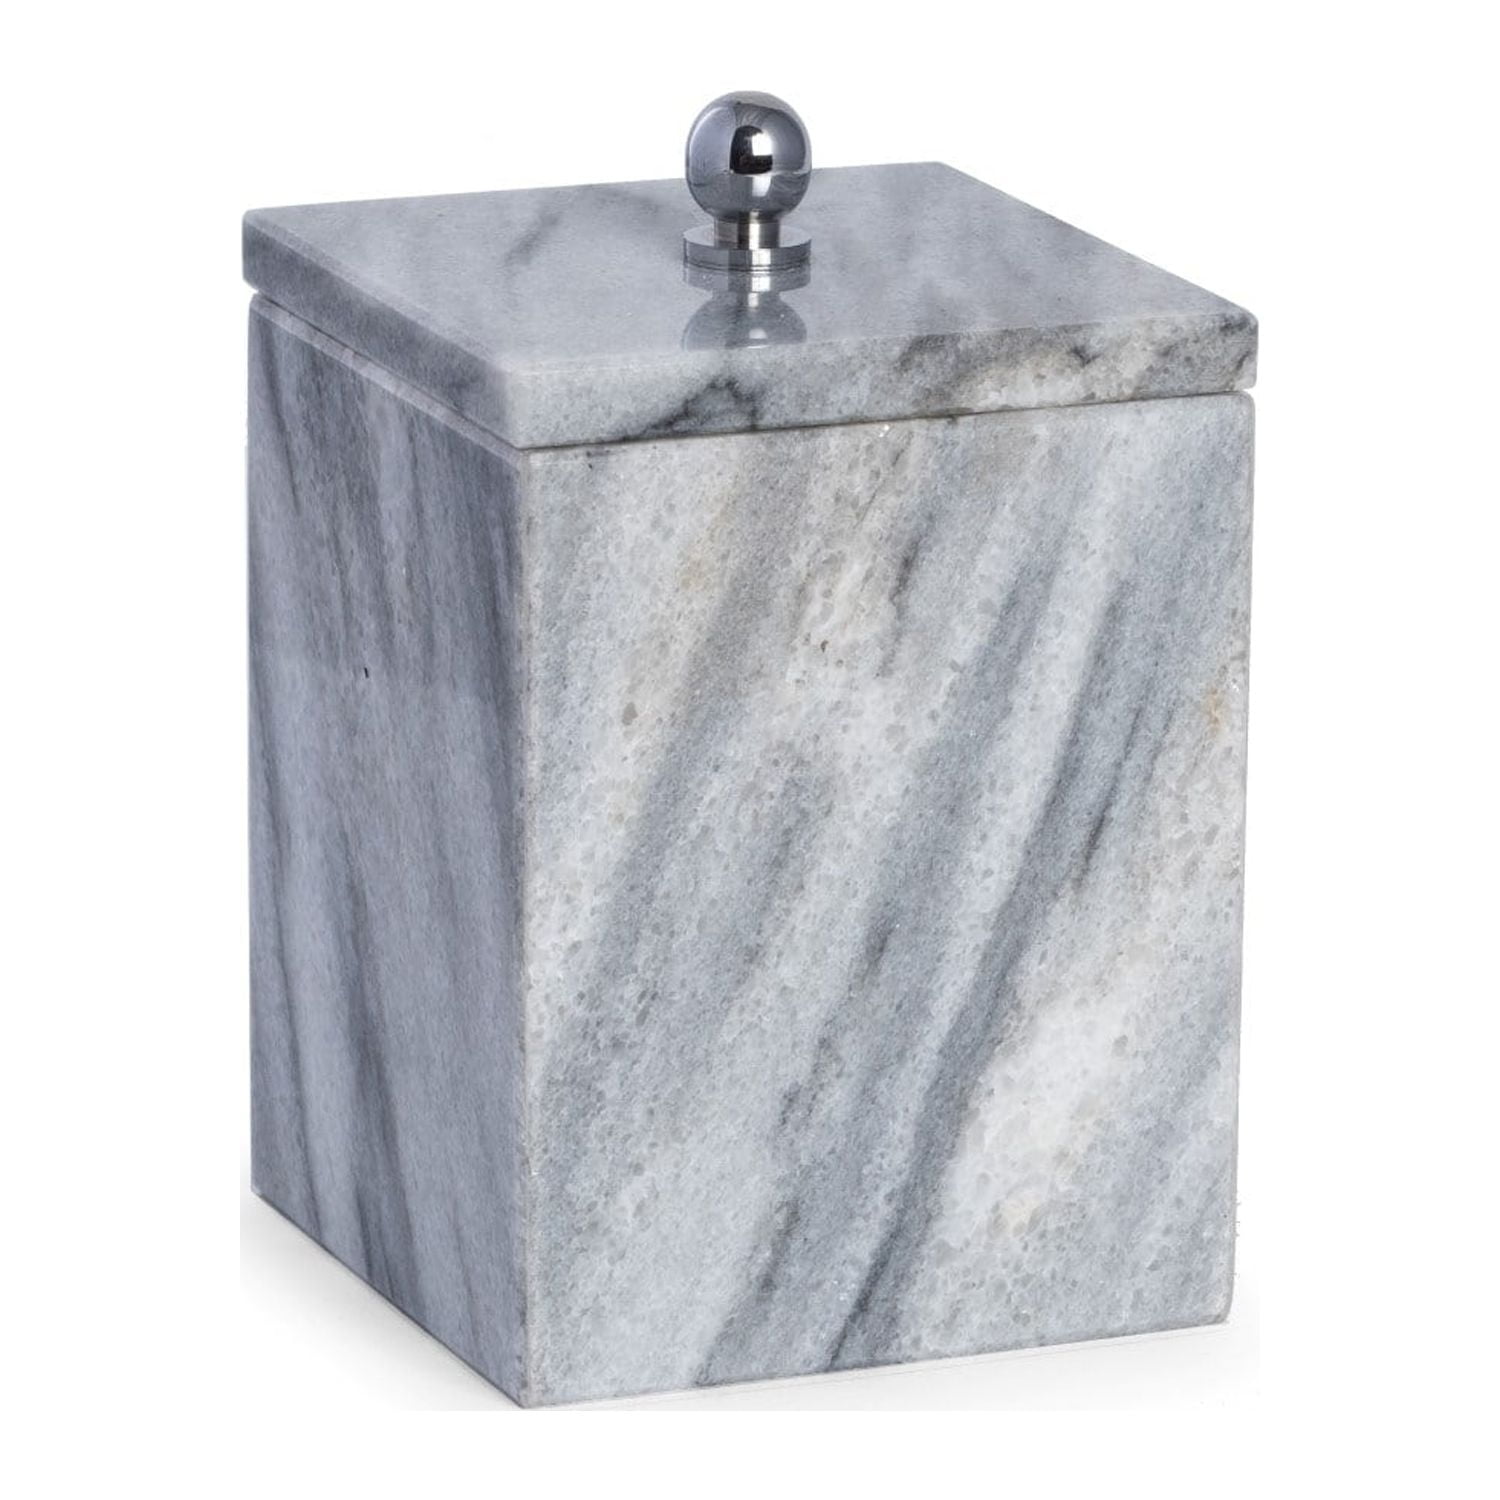 Picture of Bey-Berk International TT203G Marble Bath Canister with Lid in Cloud, Grey & White 